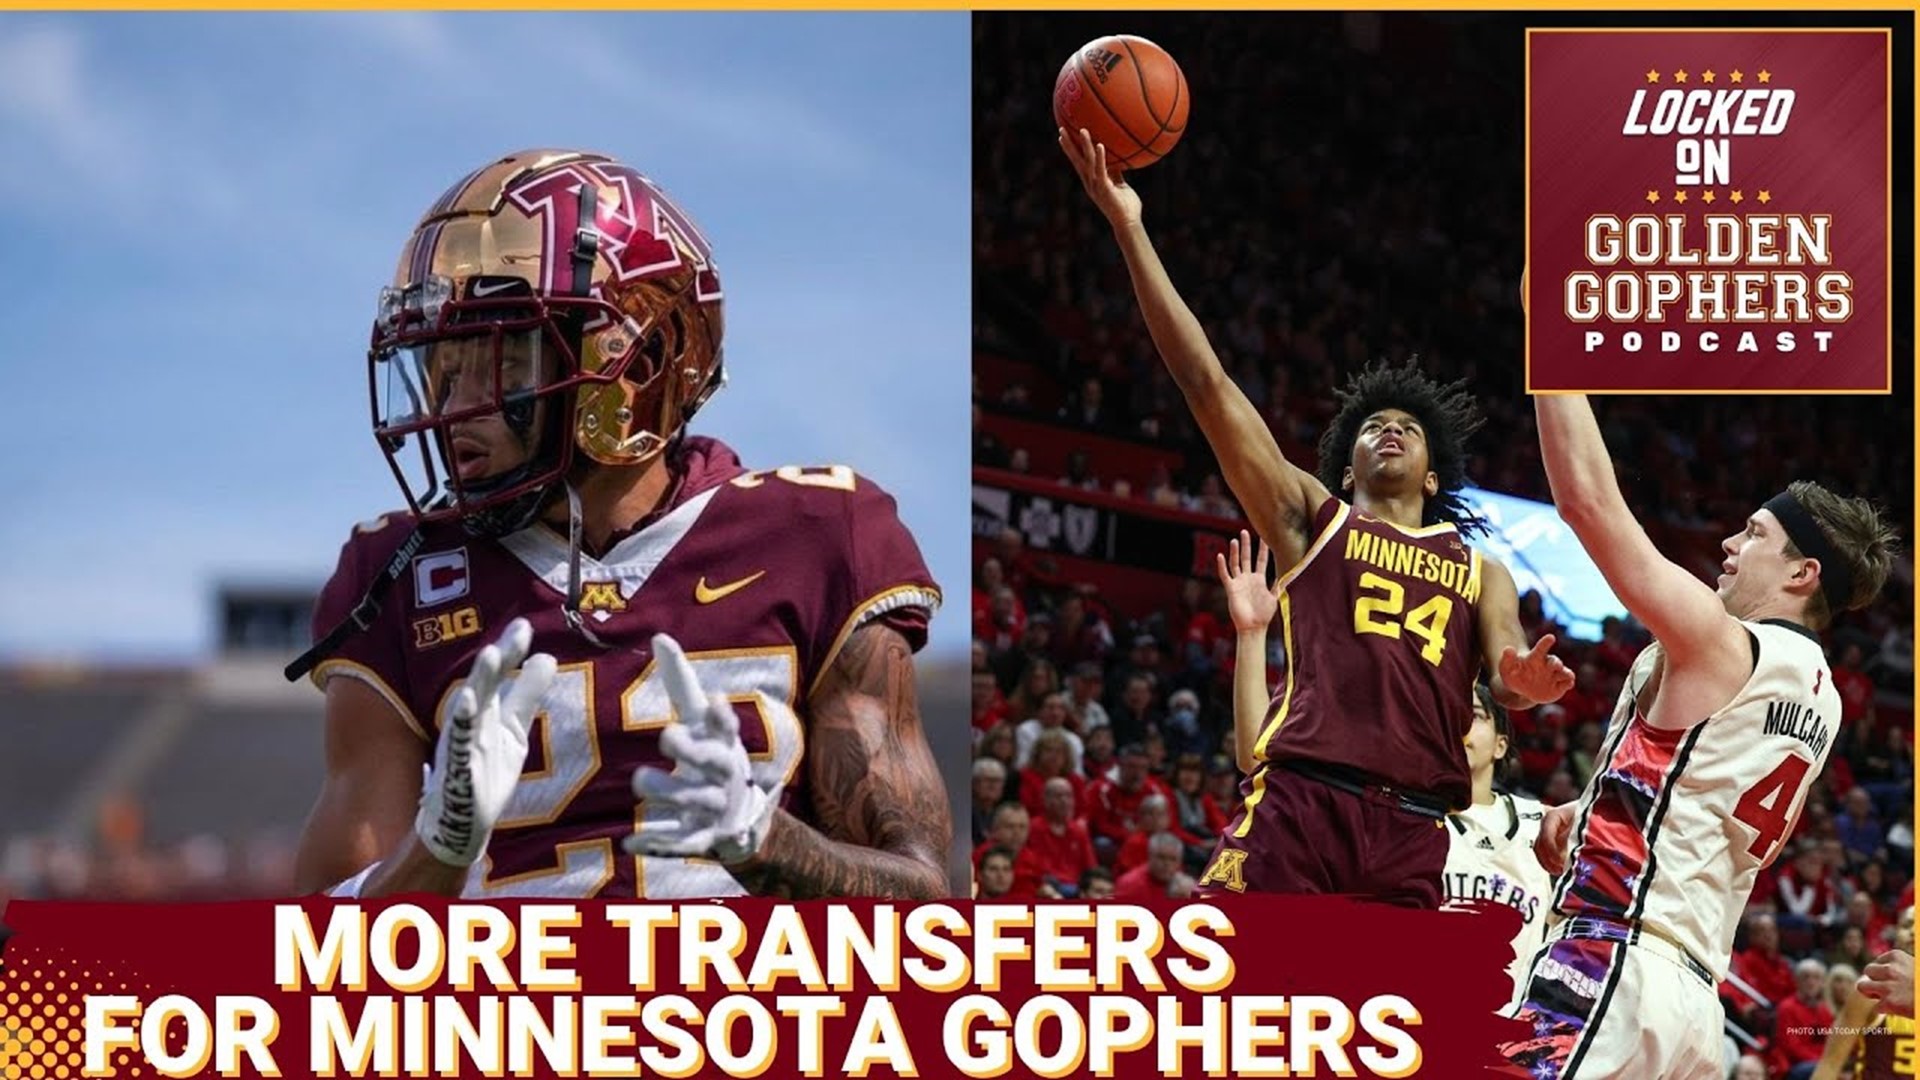 The Minnesota Gophers have 2 players in both basketball and football officially enter the transfer portal. Where do these departures leave the Gophers moving forward